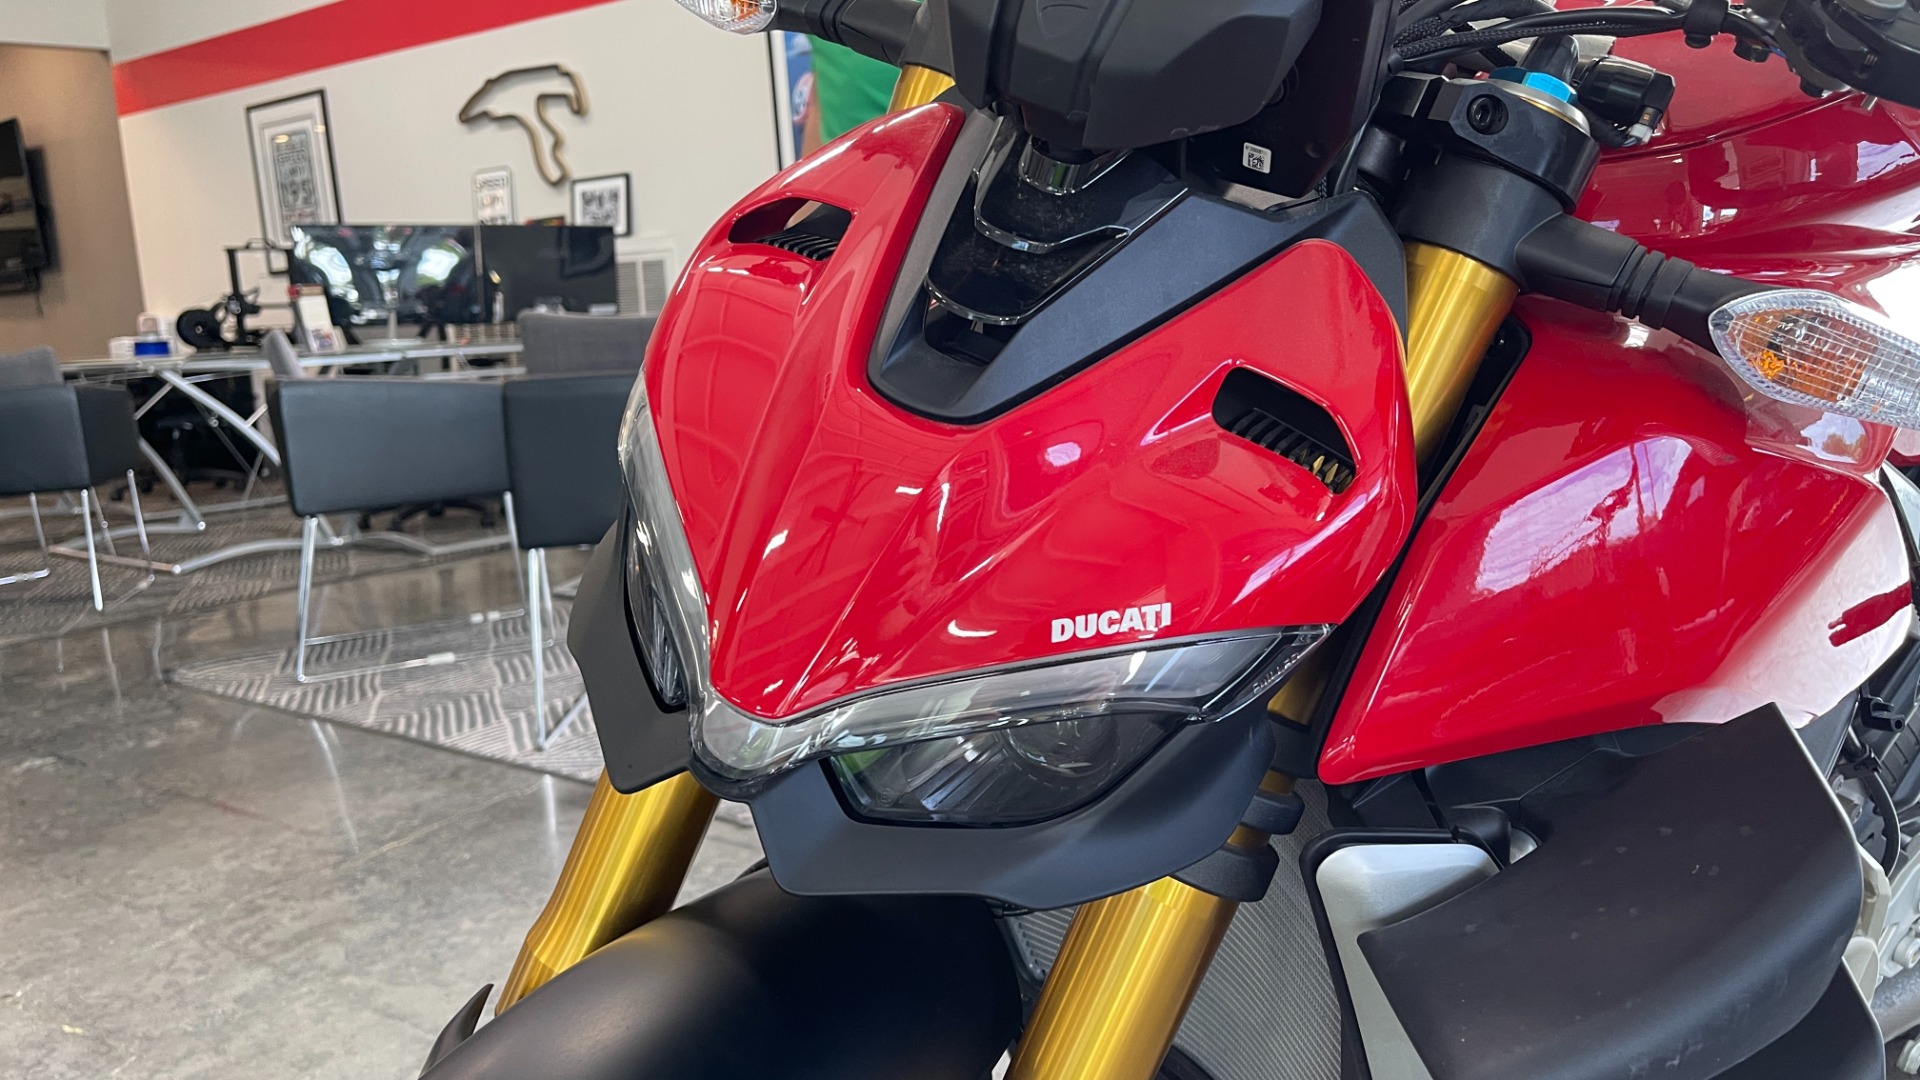 Used 2020 Ducati STREETFIGHTER V4S 1100CC MOTORCYCLE / 208HP (153 kW) / LIKE NEW for sale $24,599 at Formula Imports in Charlotte NC 28227 8